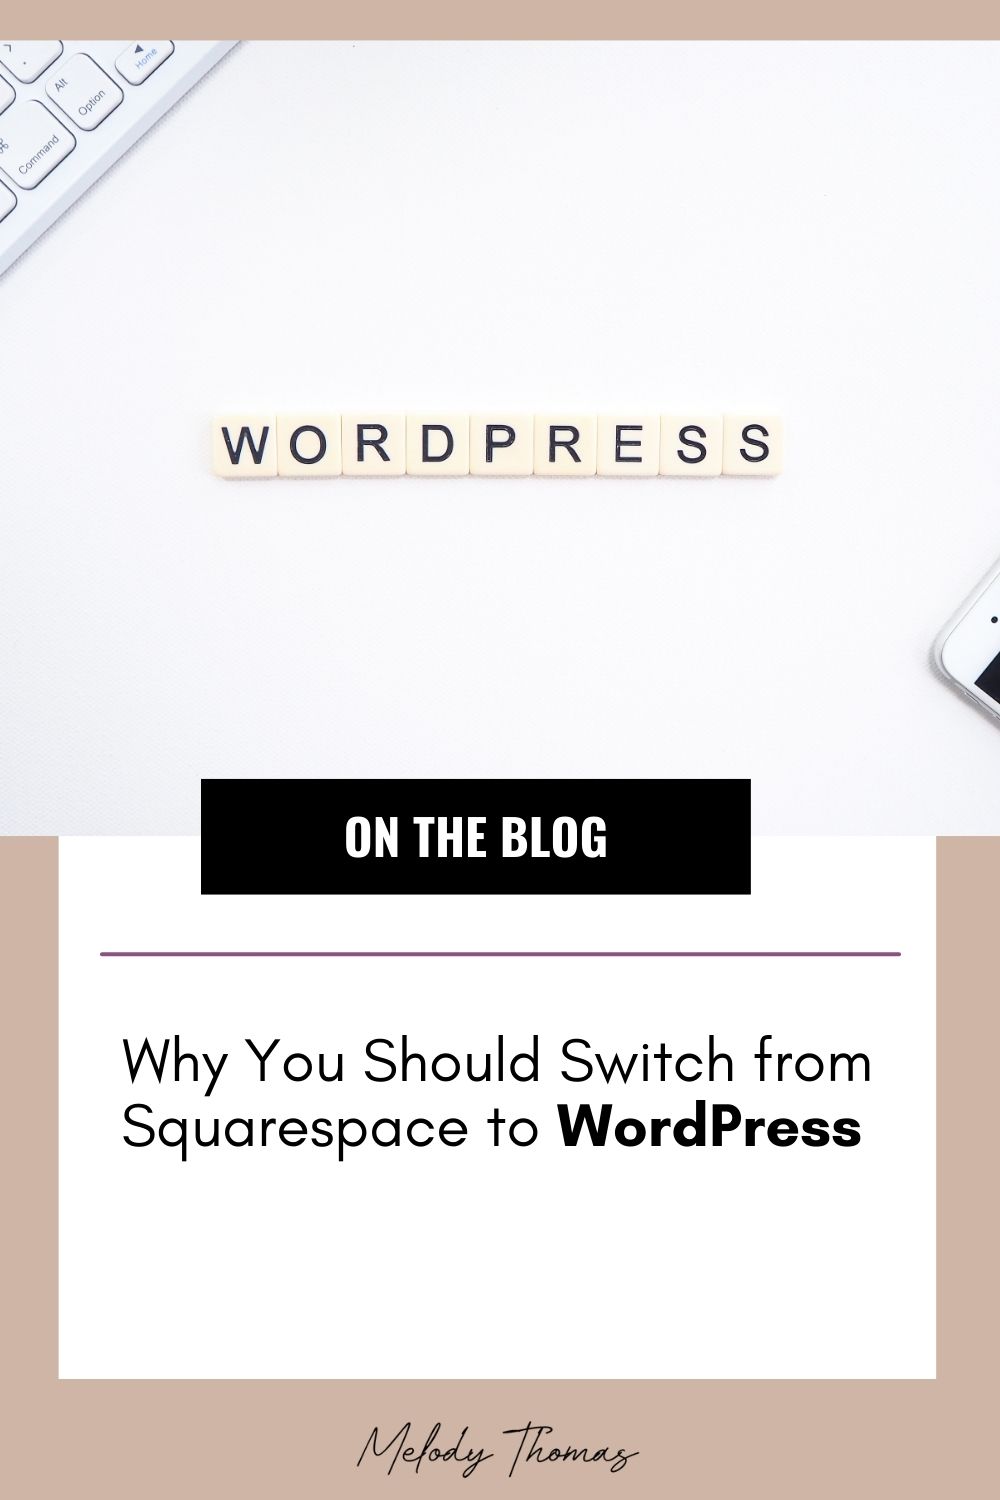 Why You Should Switch from Squarespace to WordPress